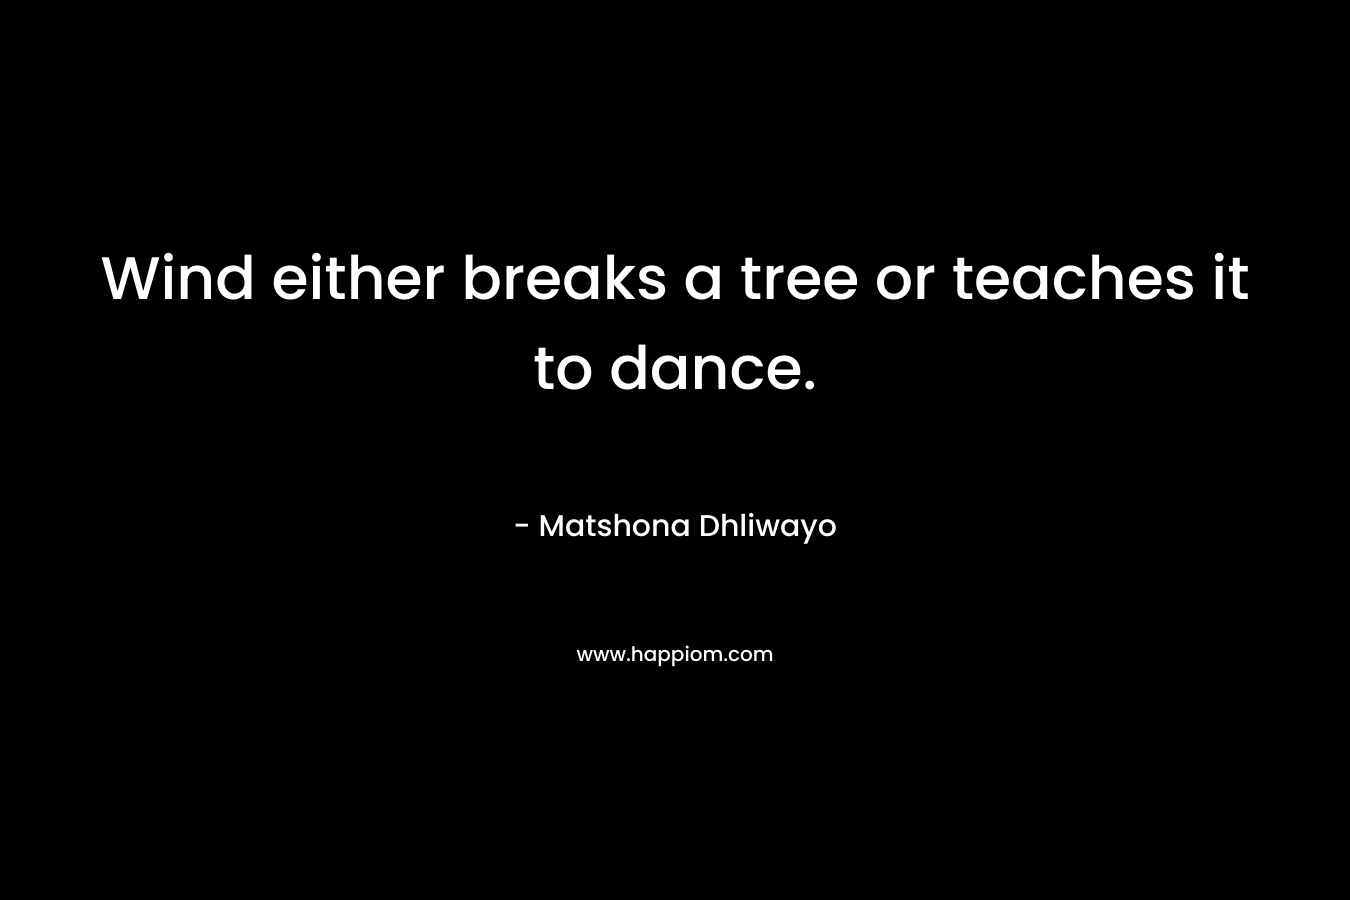 Wind either breaks a tree or teaches it to dance.